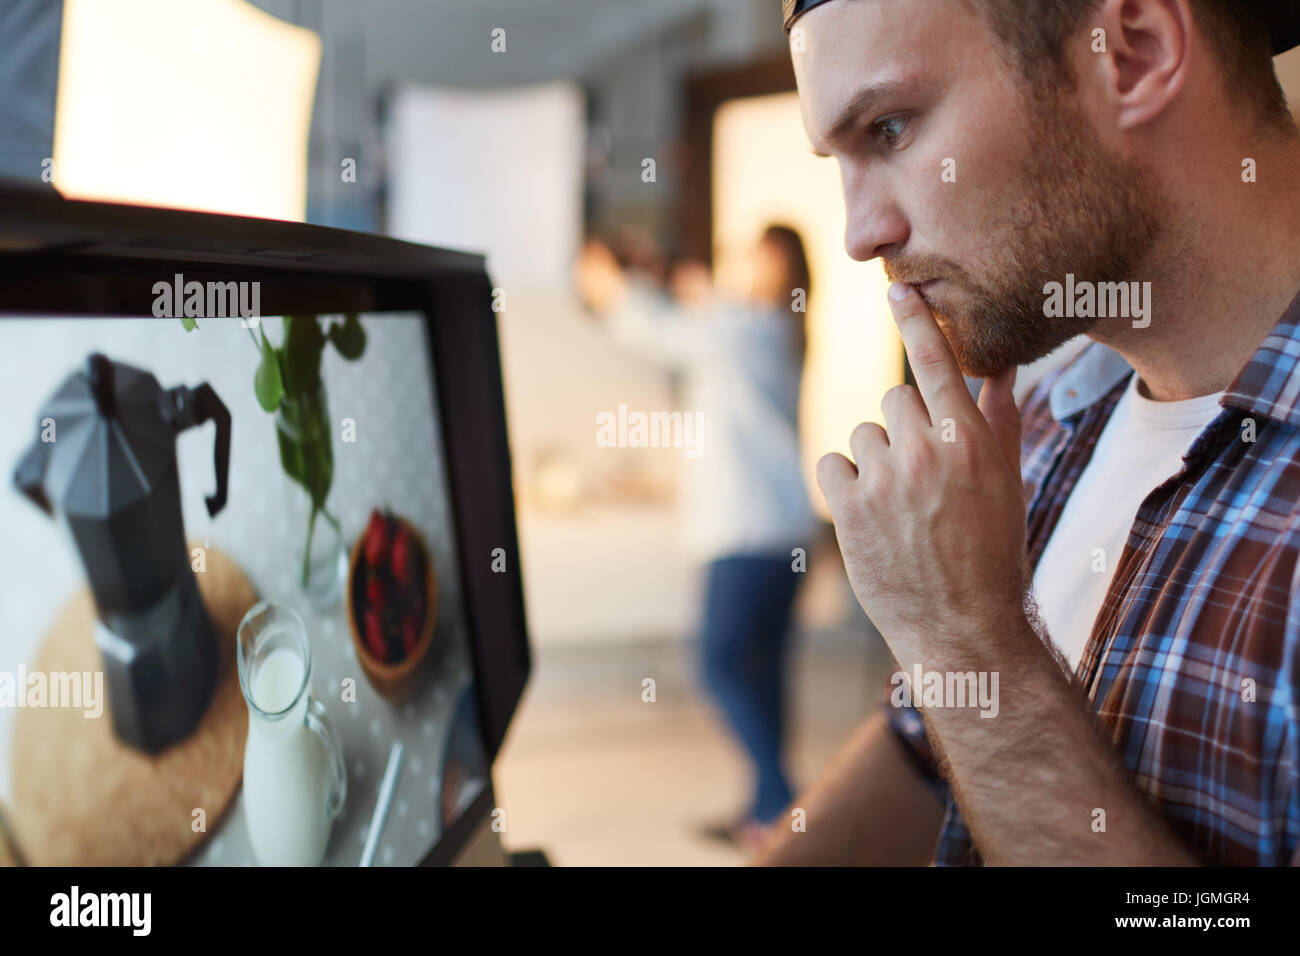 Pensive food-blogger in front of monitor Stock Photo